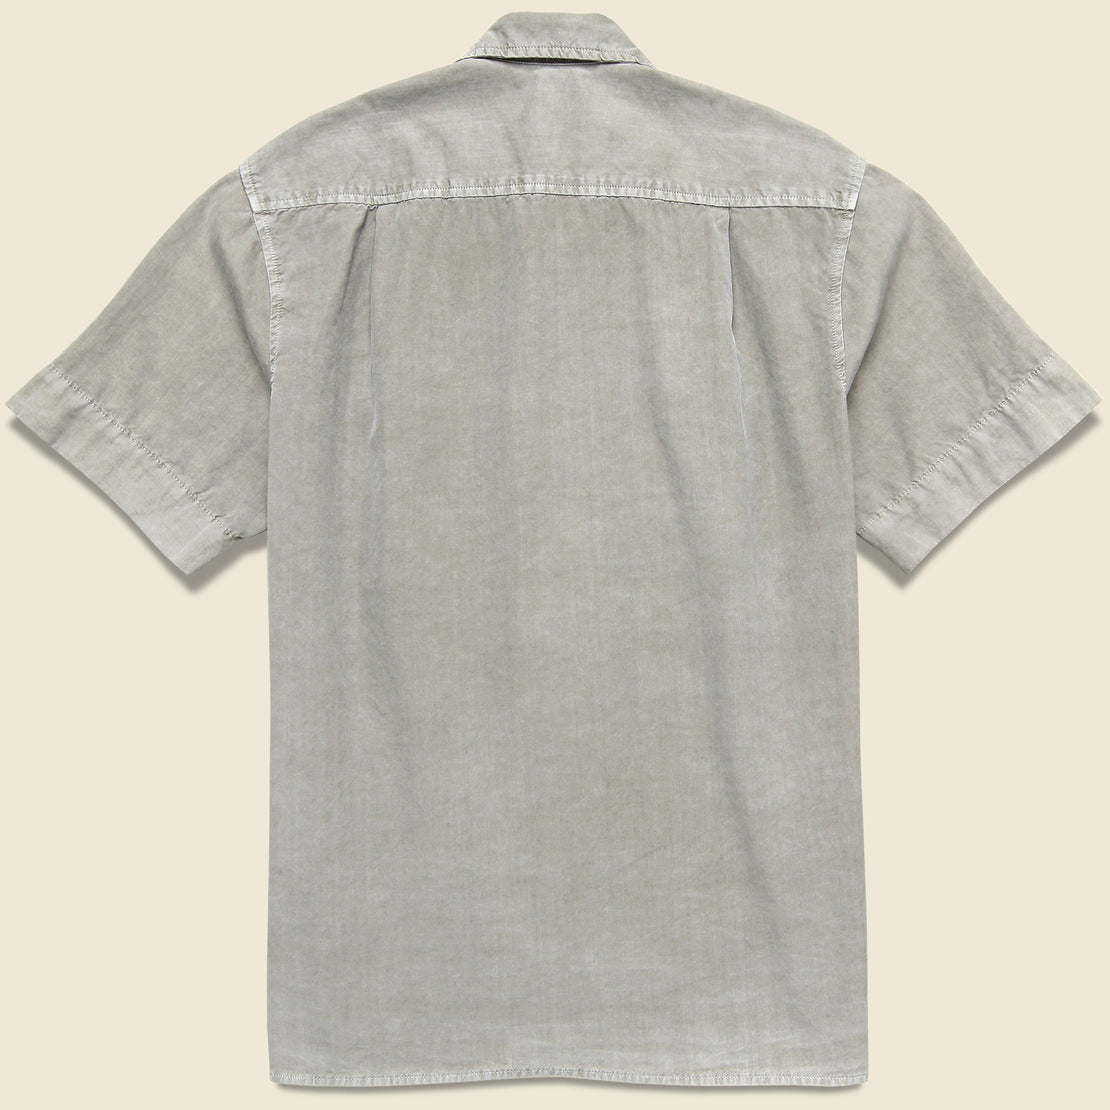 Fatigue Camp Shirt - Khaki - Save Khaki - STAG Provisions - Tops - S/S Woven - Solid